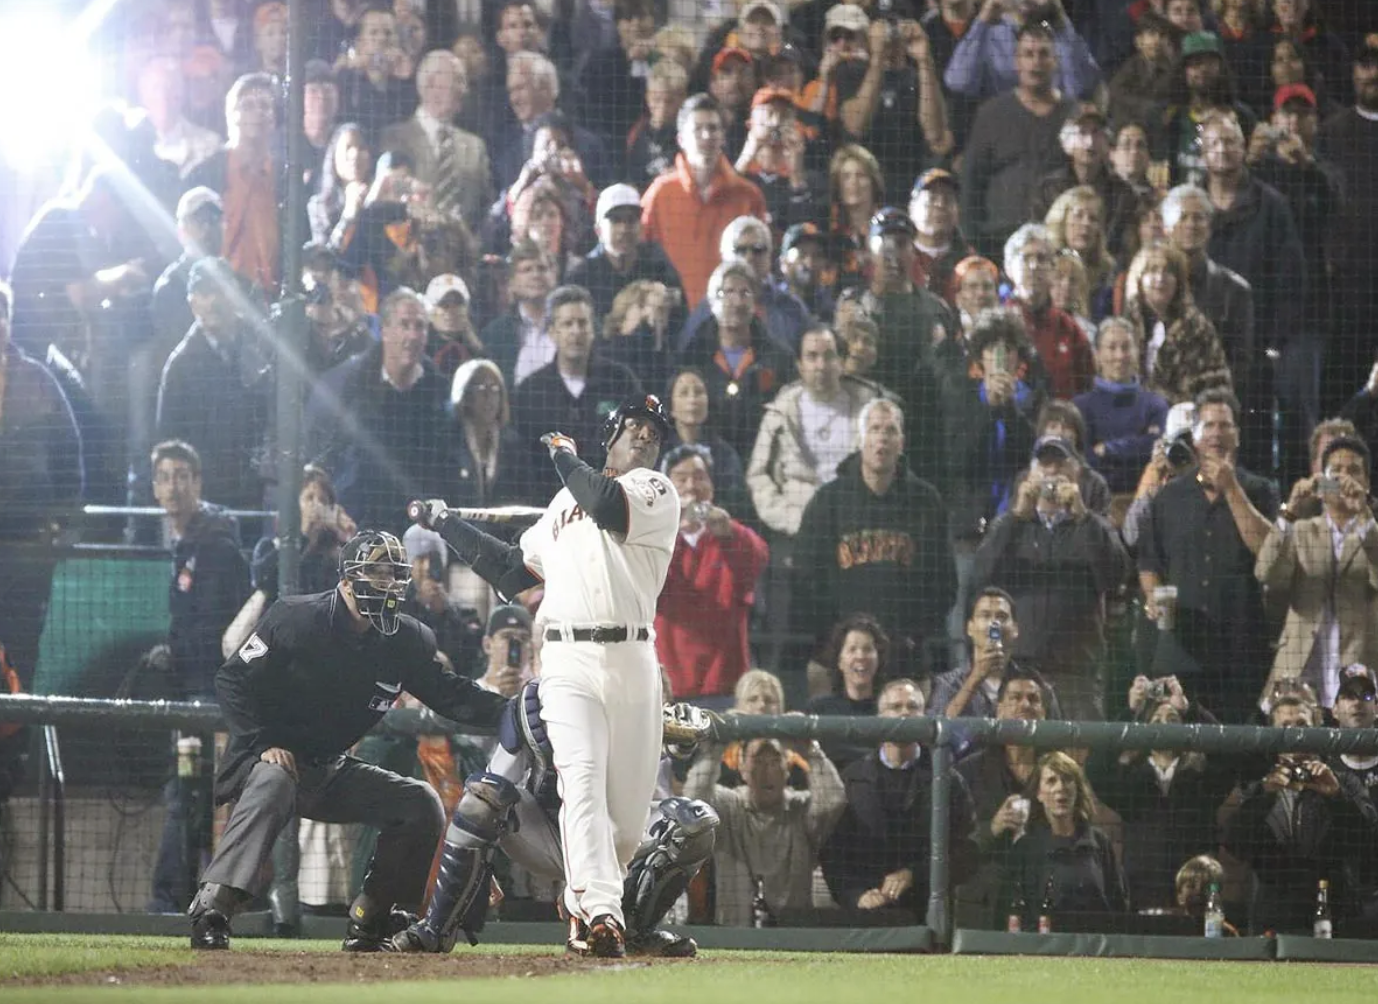 Most iconic fascinating sports photos - barry bonds 756